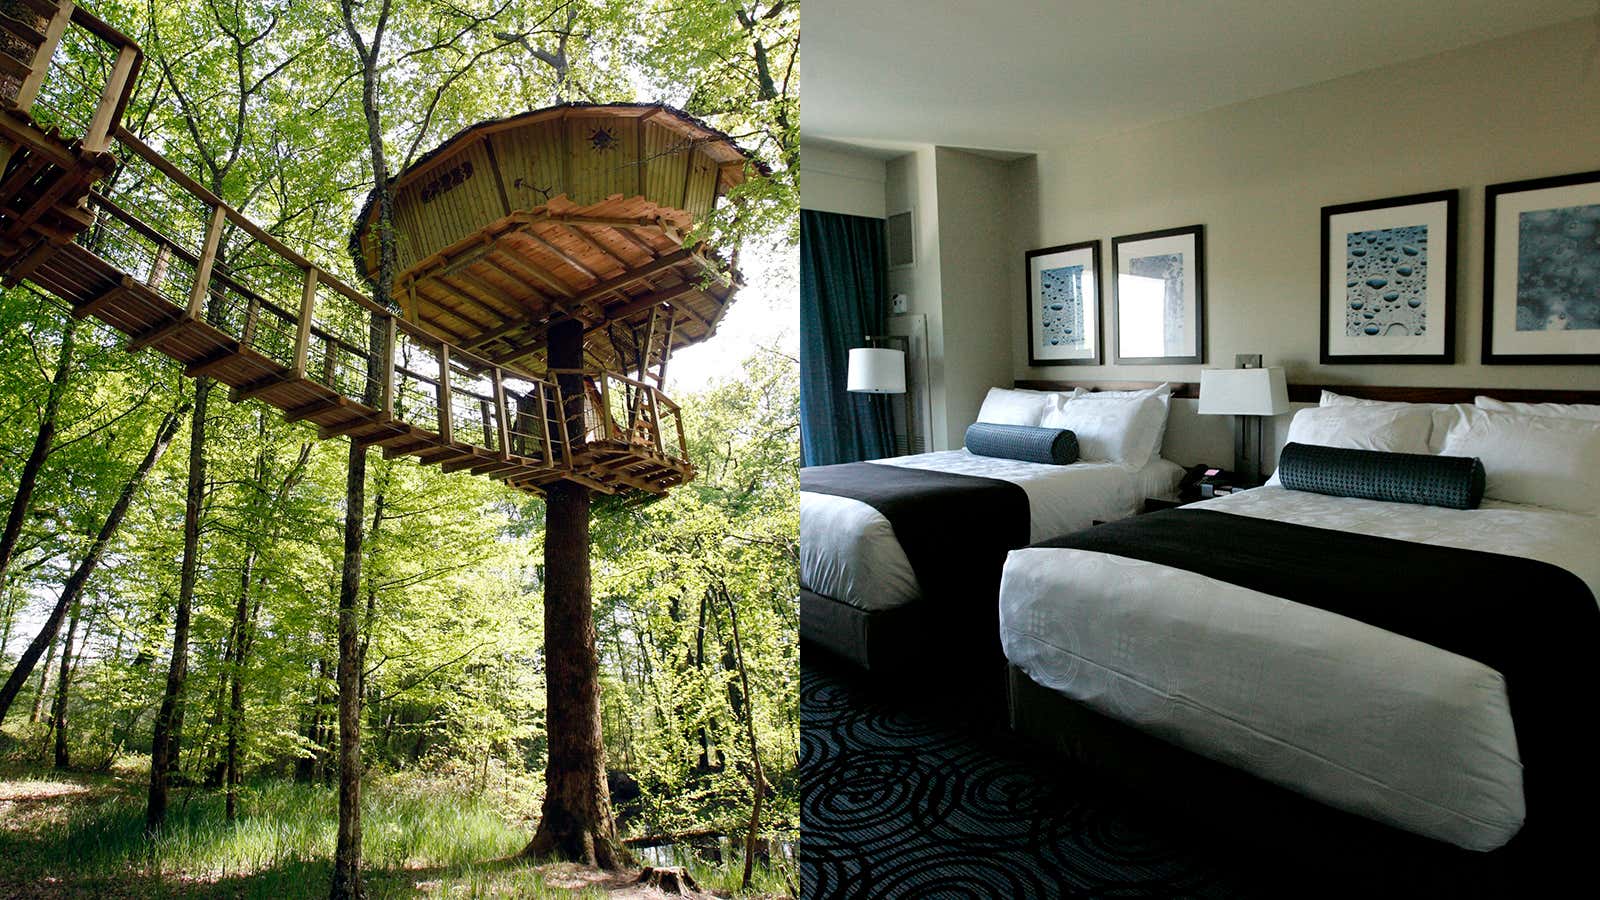 From treehouse chic to business efficiency—Airbnb is everything to all travelers.